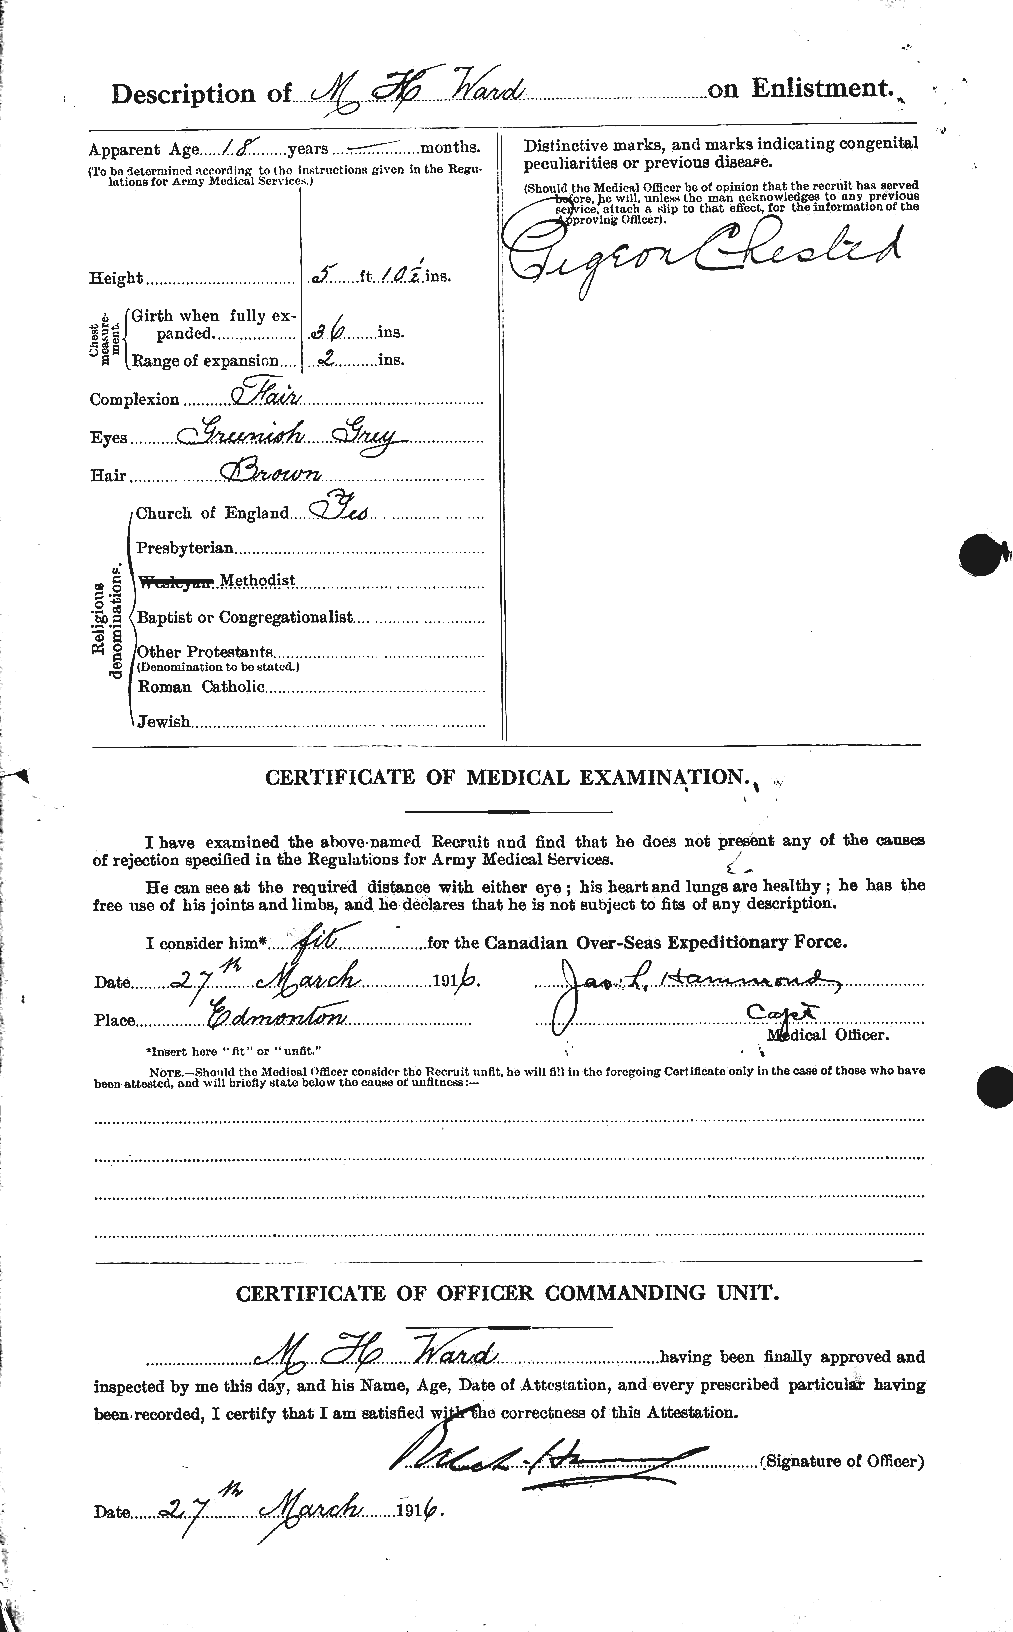 Personnel Records of the First World War - CEF 659599b